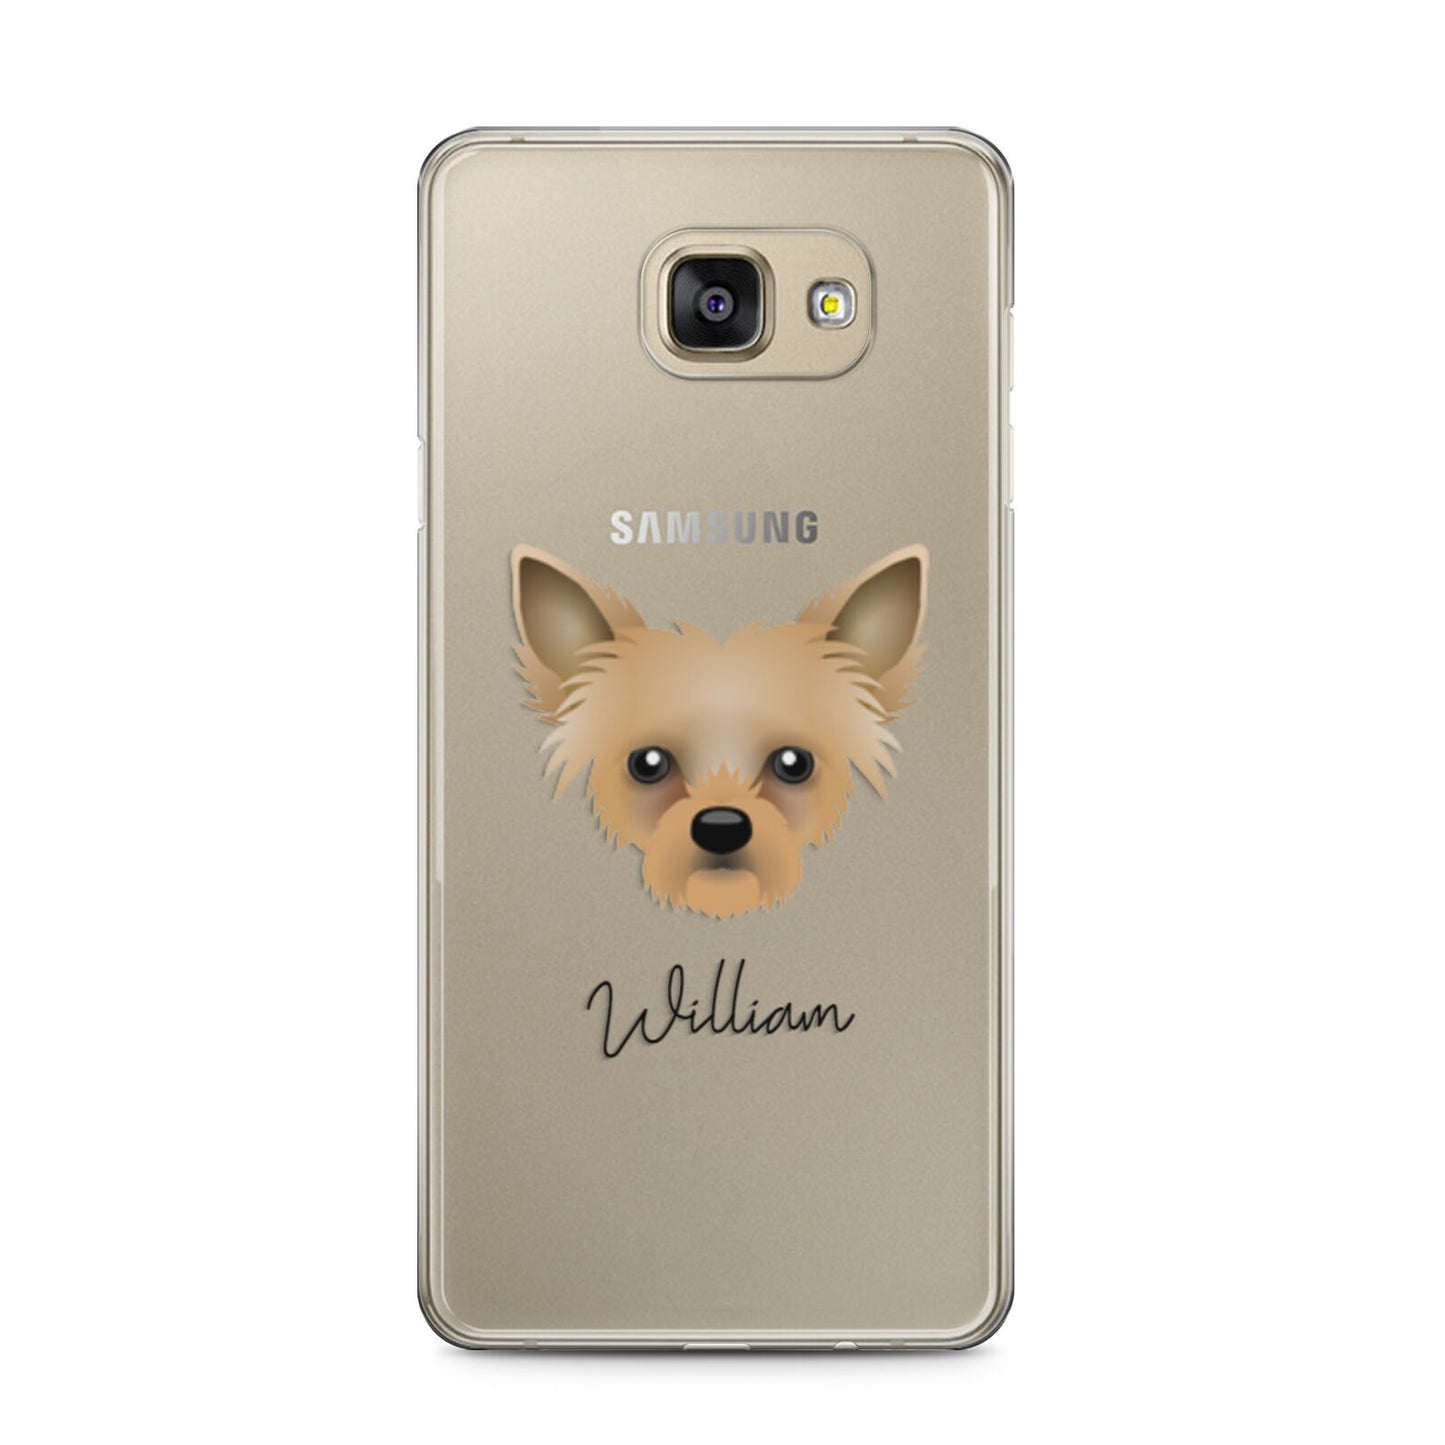 Chipoo Personalised Samsung Galaxy A5 2016 Case on gold phone